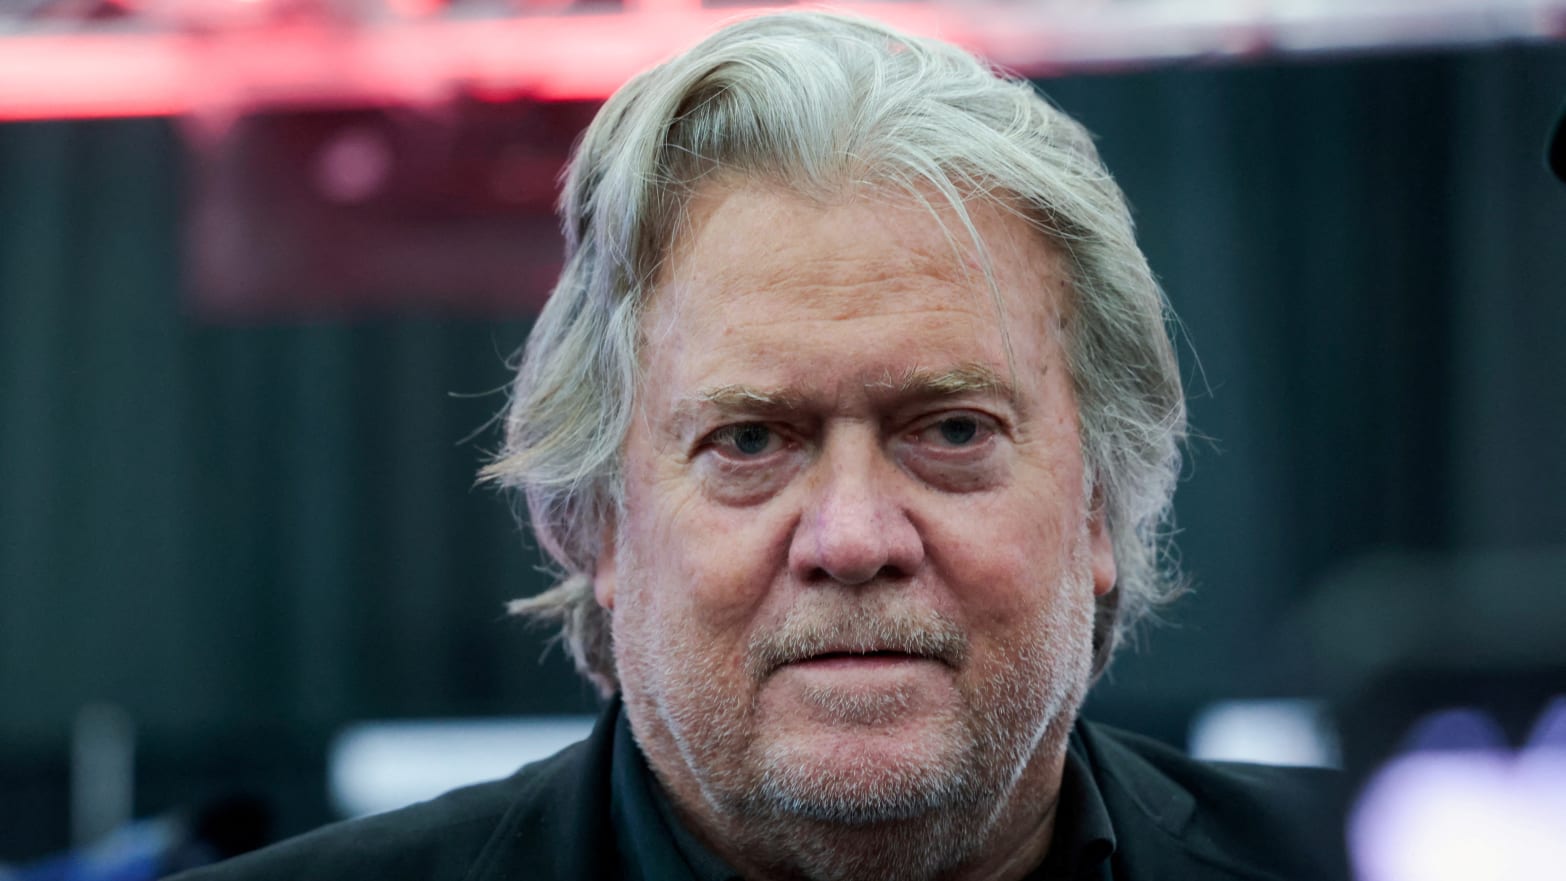 Steve Bannon has reported to prison to begin his sentence after being found guilty on contempt of Congress charges.